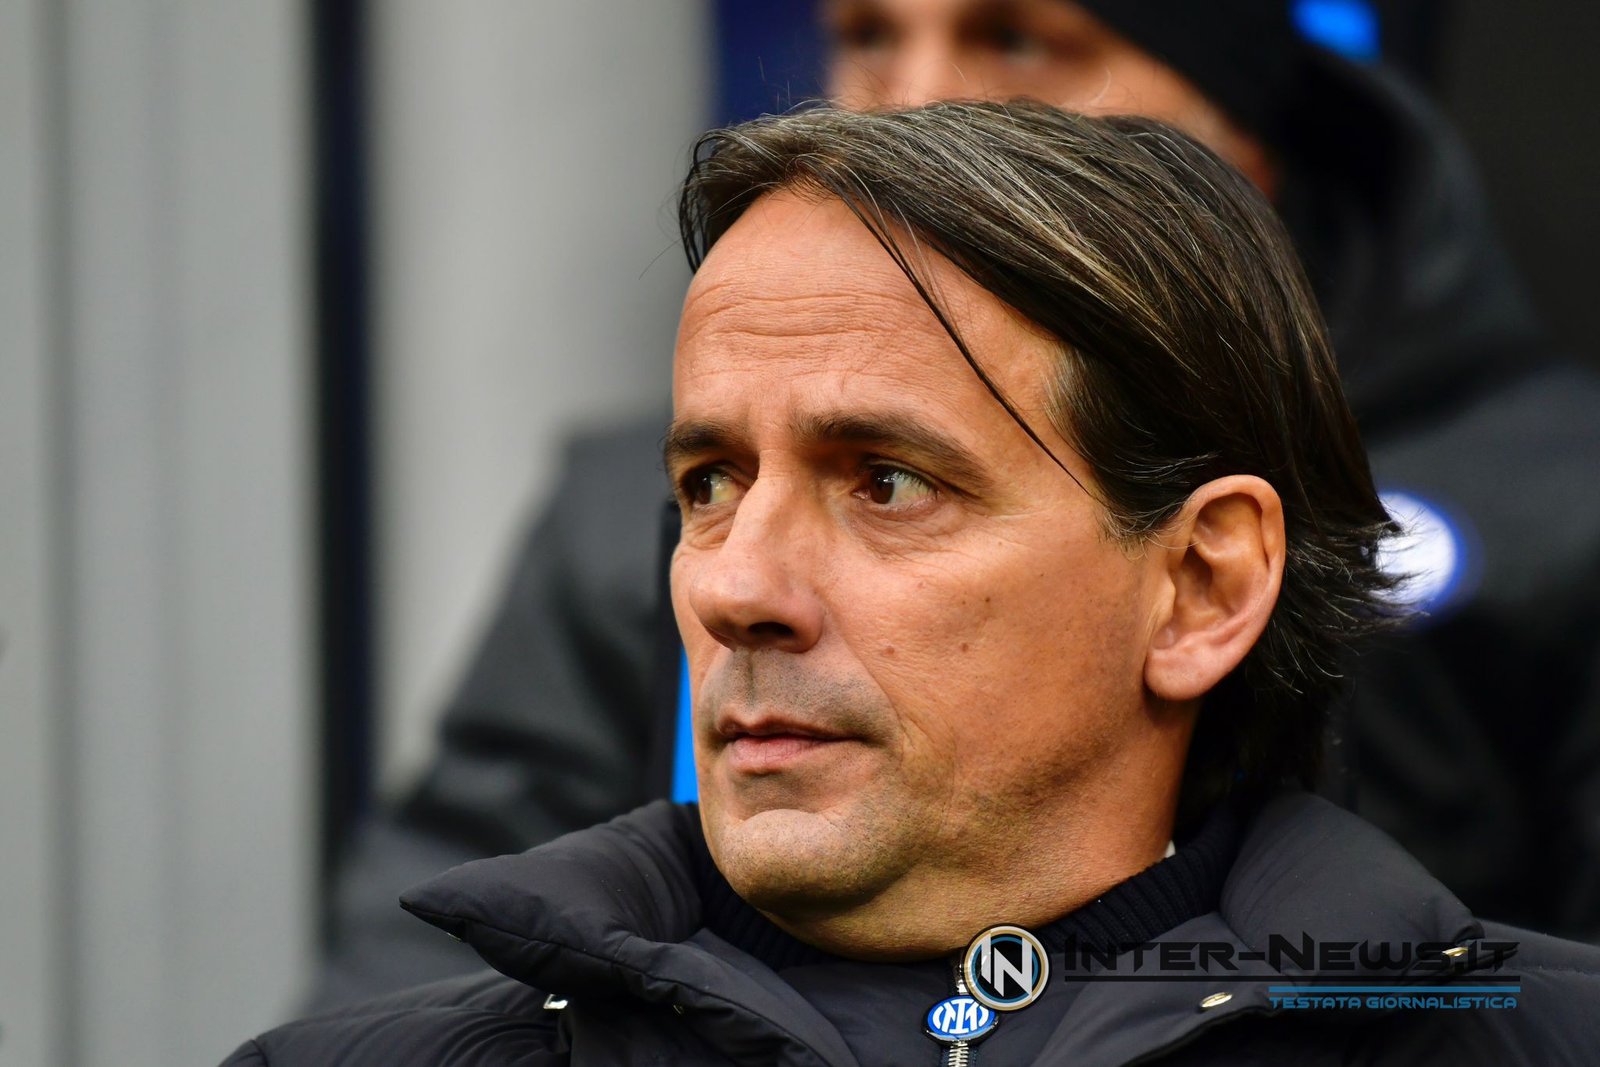 Simone Inzaghi in Inter-Verona (Photo by Tommaso Fimiano/Inter-News.it ©)